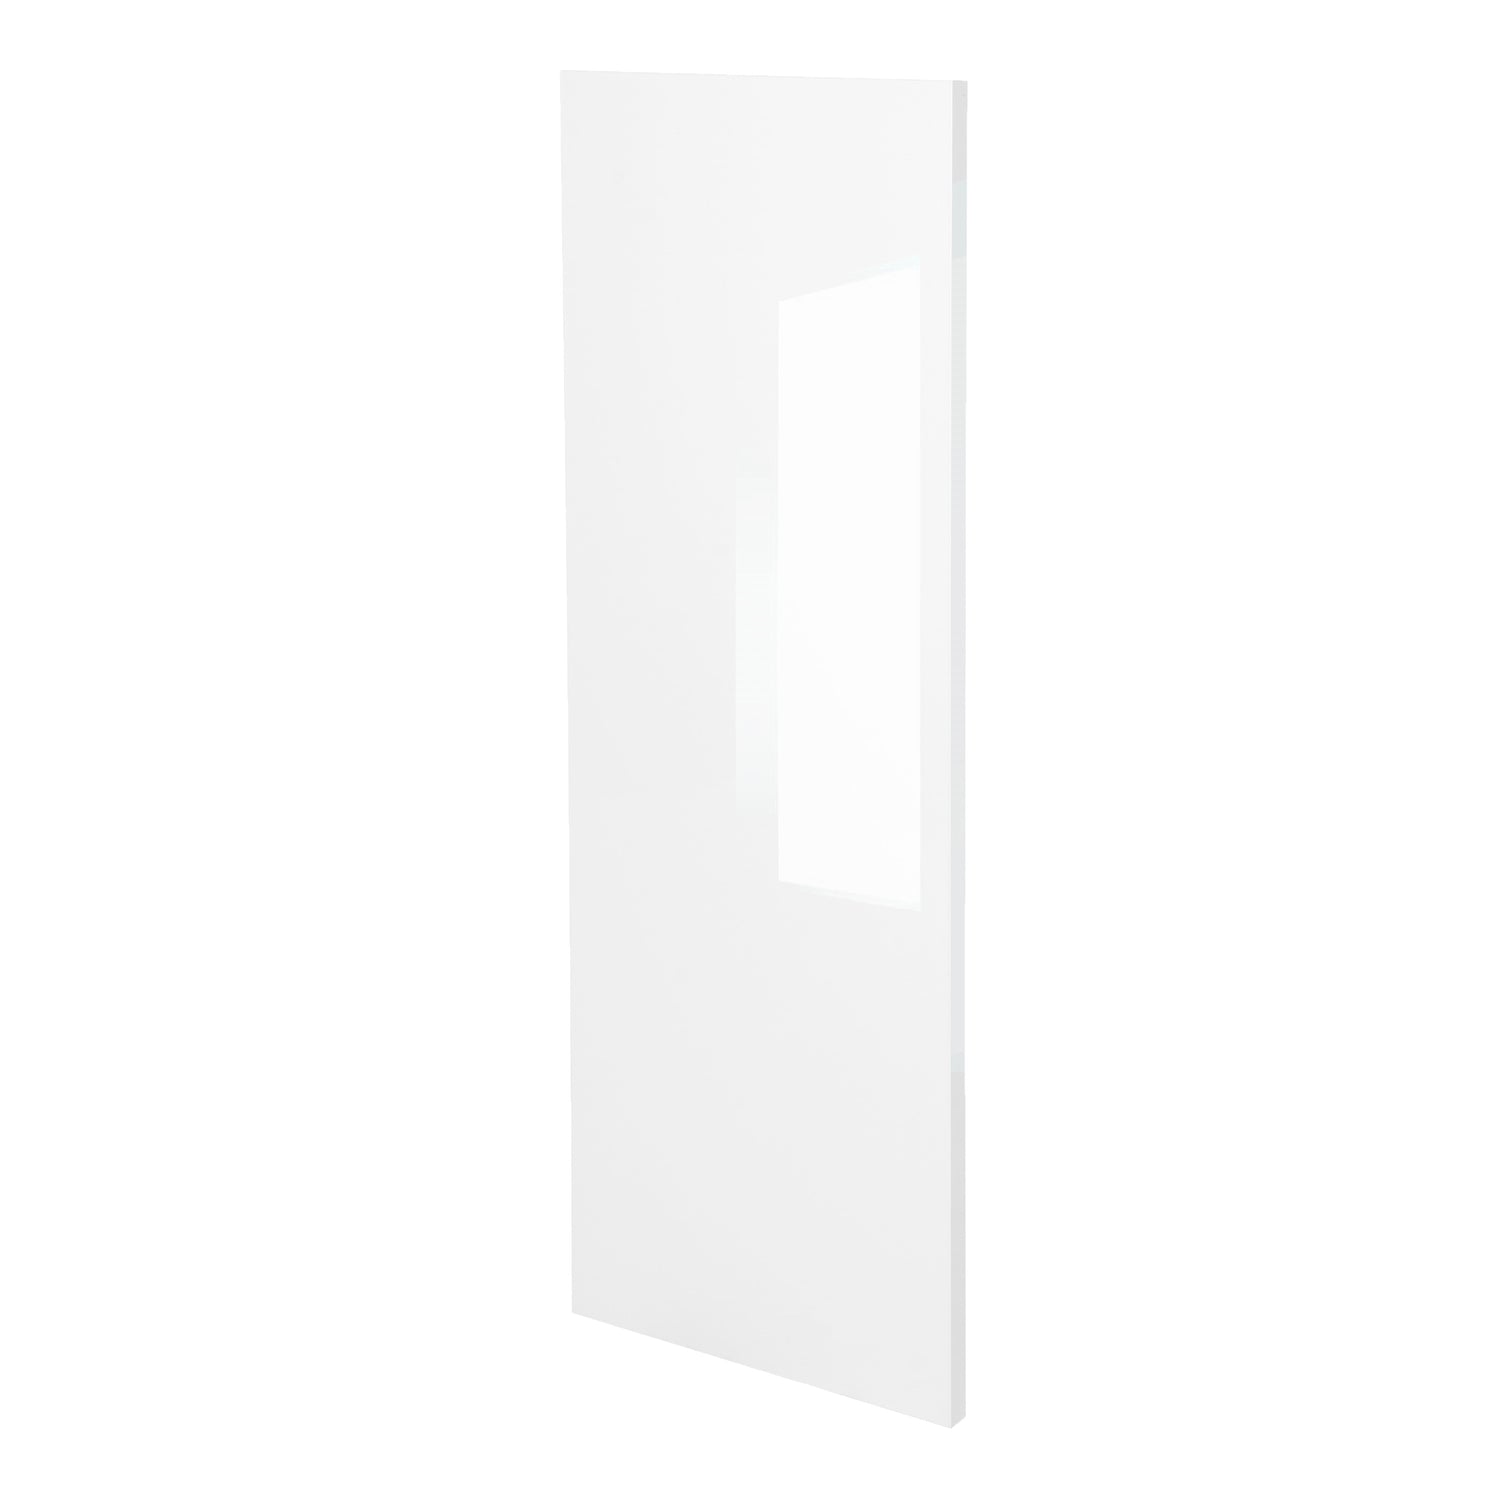 White Gloss Slab Style Wall Kitchen Cabinet End Panel (12 in W x 0.75 in D x 36 in H) -  Pro-Edge HD